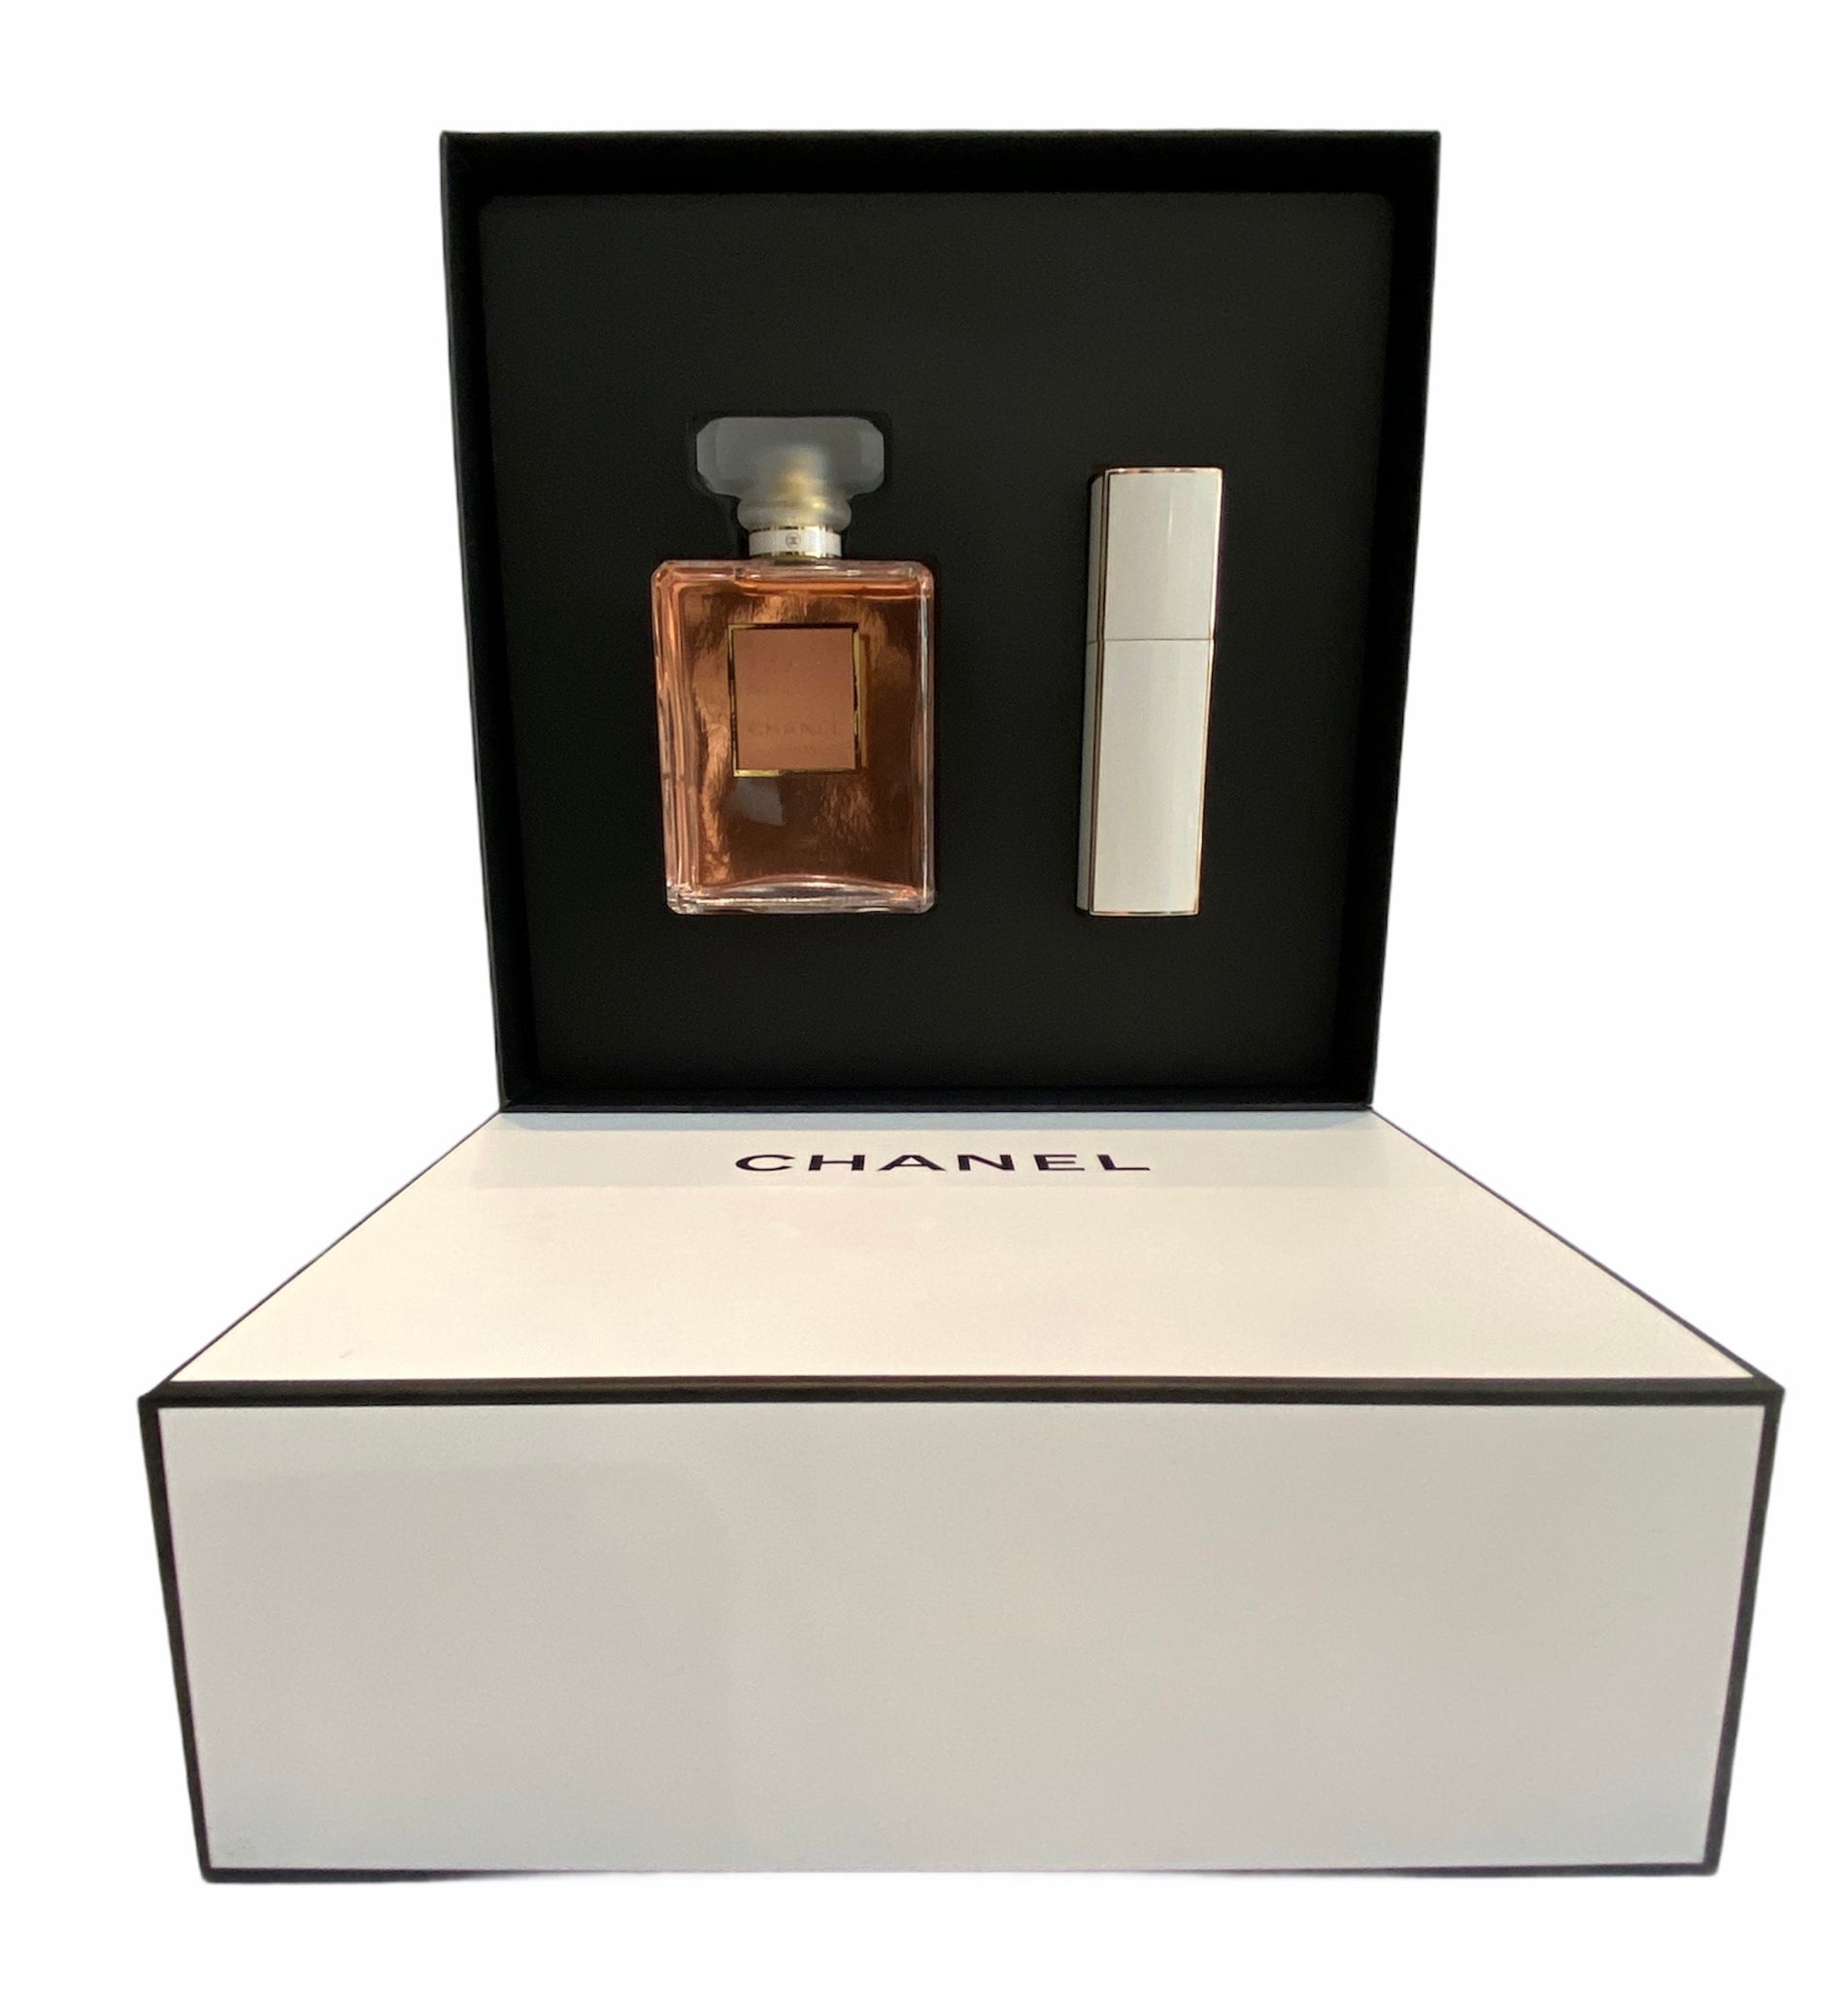 COCO MADEMOISELLE BY CHANEL PERFUME FOR WOMEN SPRAY 2PC GIFT SET 3.4 OZ +  0.7 OZ NEW IN BOX for Sale in Arlington, TX - OfferUp